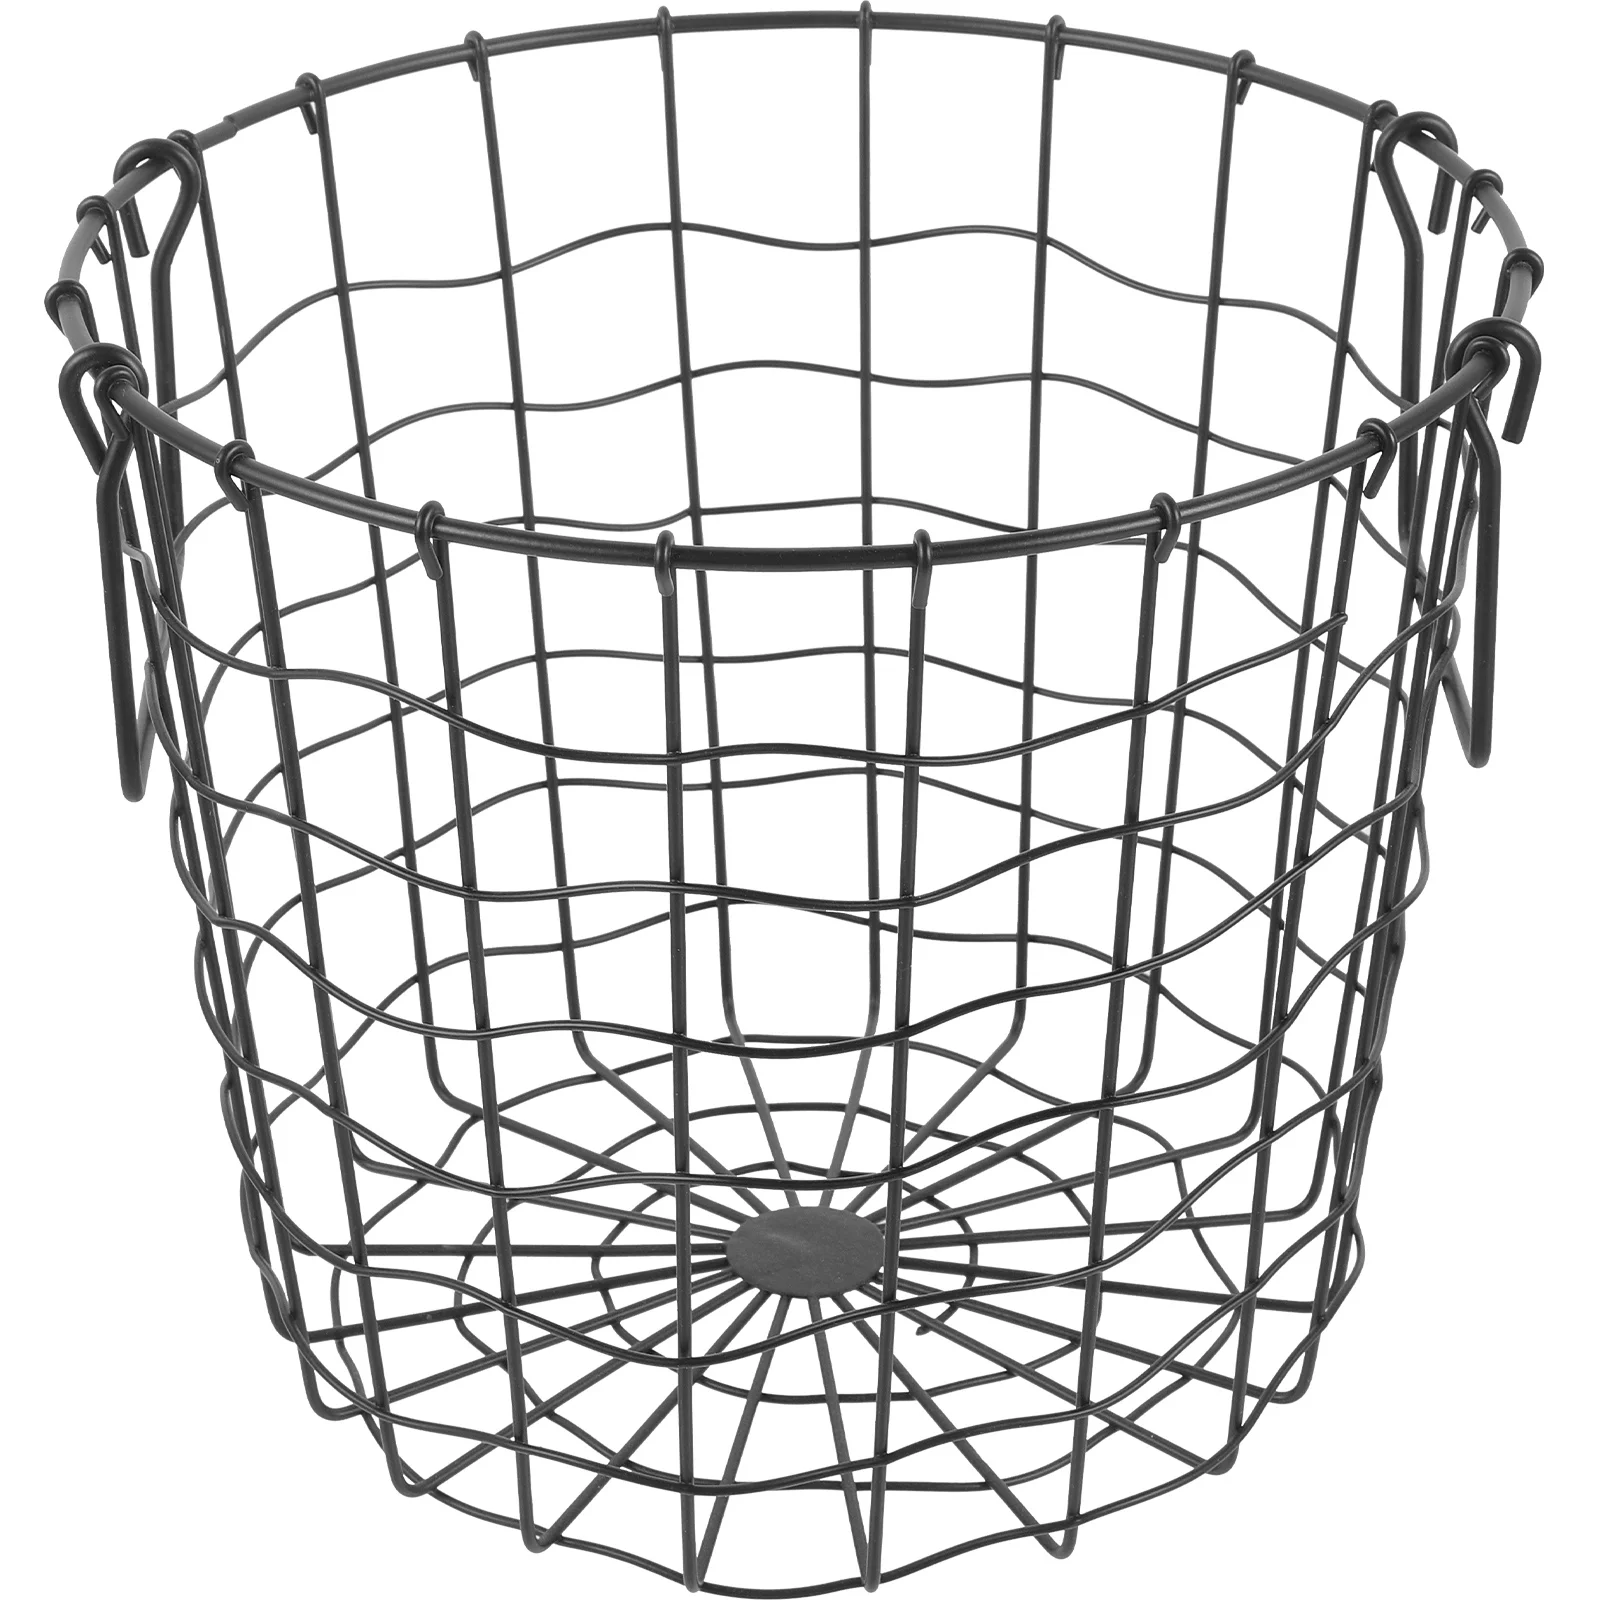 

Country Round Iron Firewood Storage Basket Outdoor (black) Baskets Metal Rack Wire Log Holders for Fireplace Organize Indoor